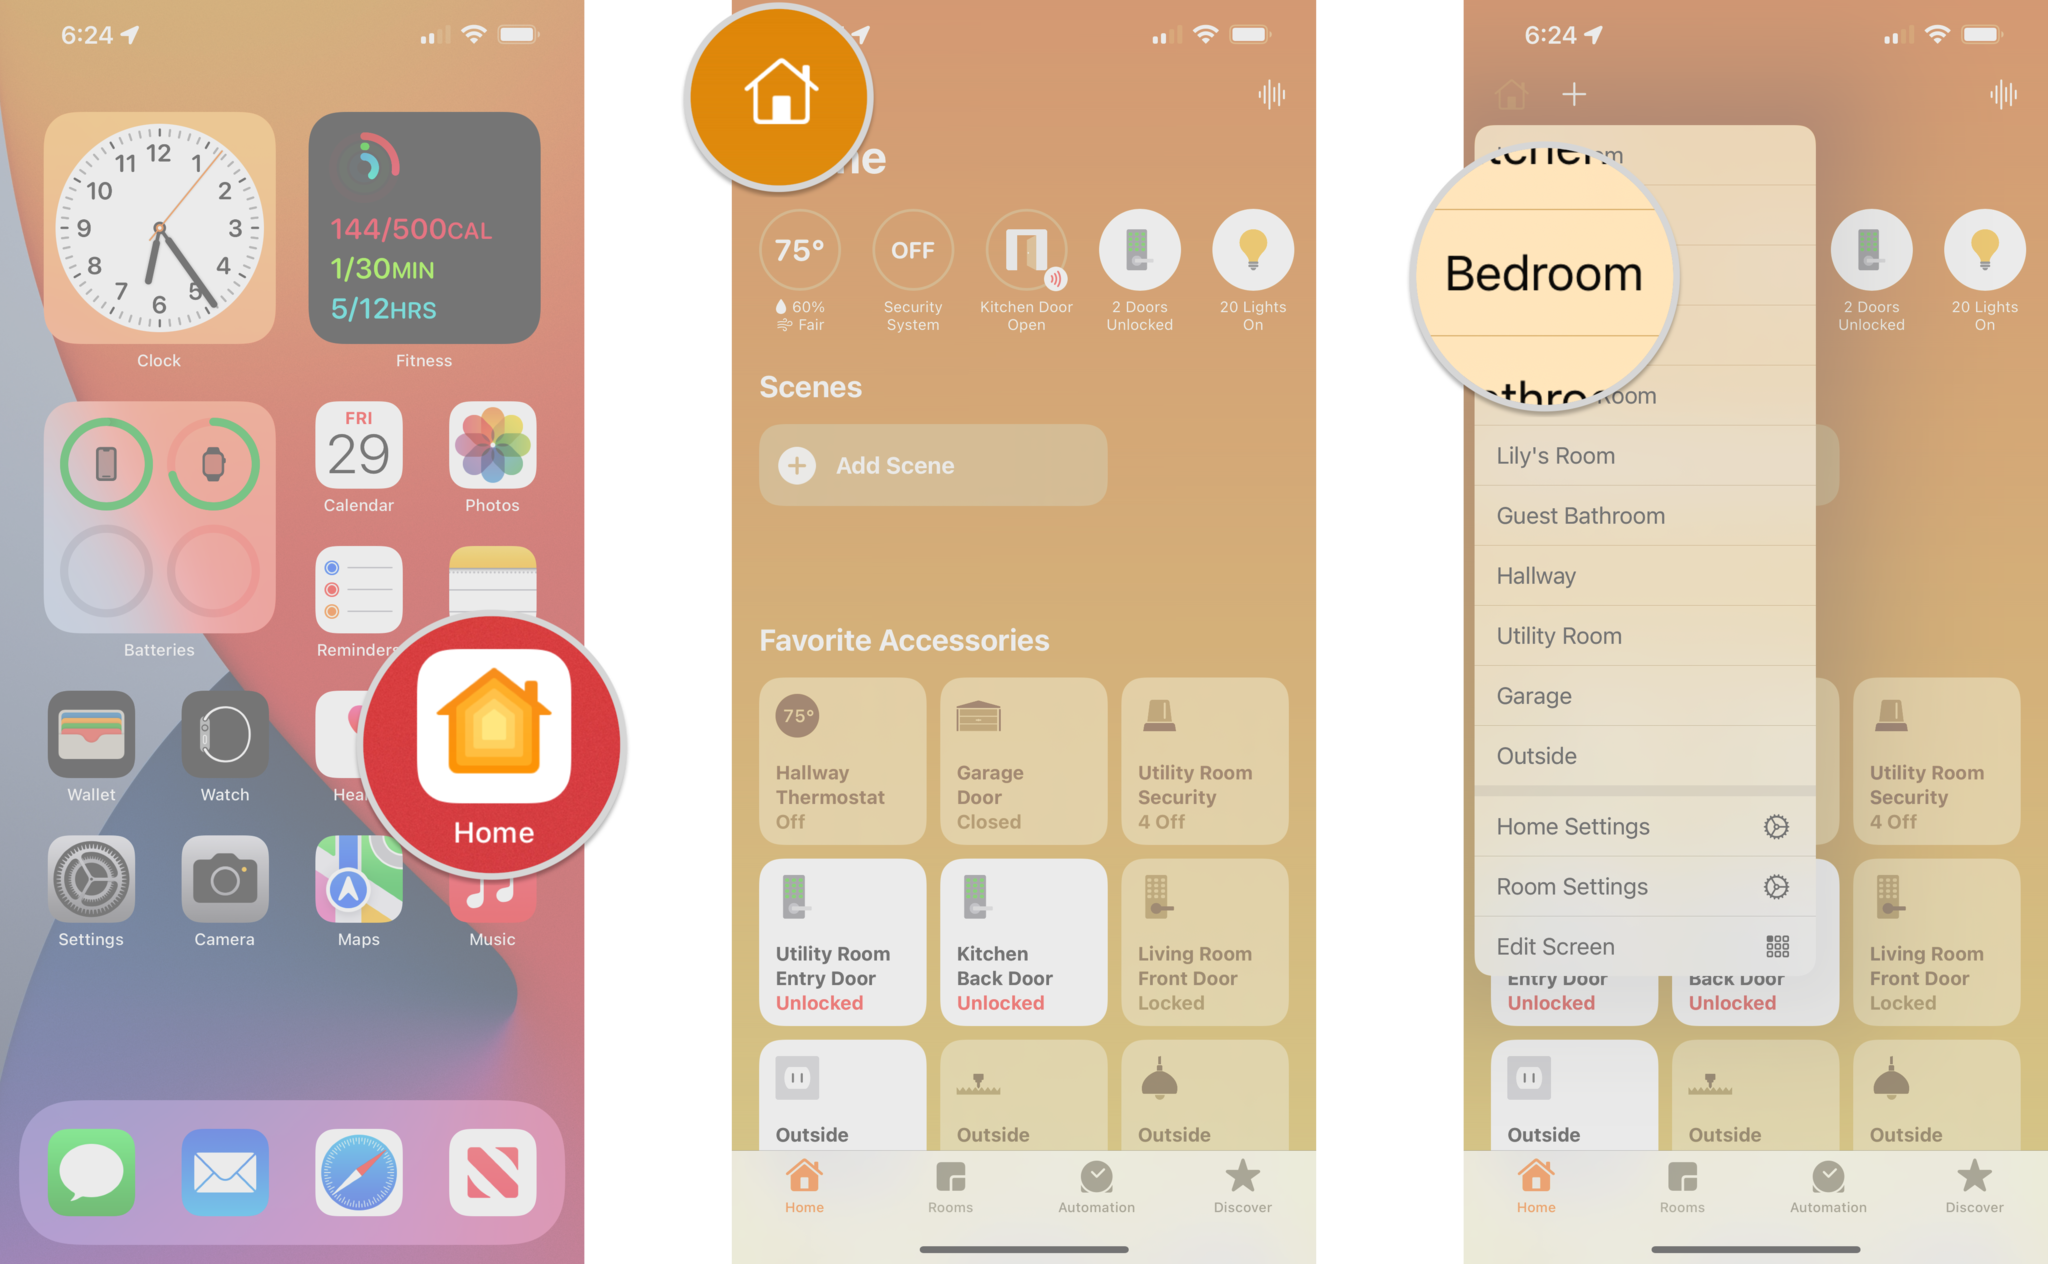 How to disable Adaptive Lighting with your HomeKit-enabled lights in the Home app on the iPhone by showing steps: Launch the Home app, Tap the House icon, Tap the name of the Room that your light is in.